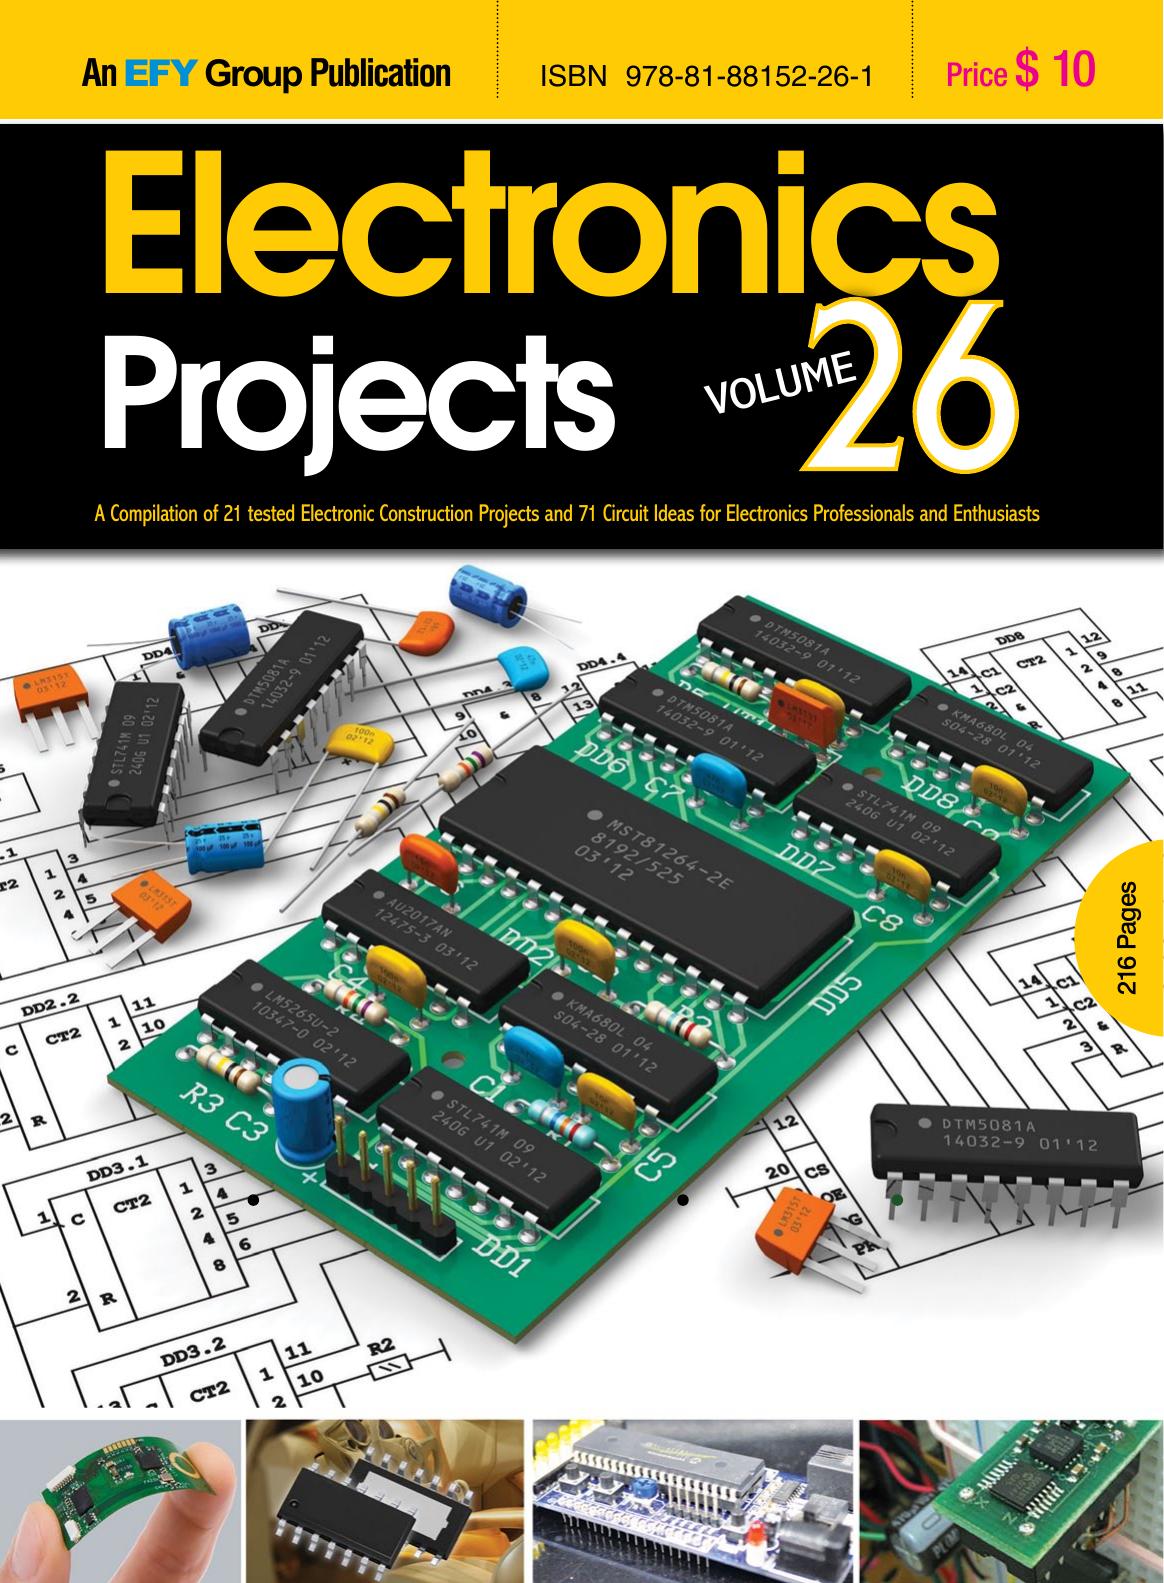 Electronics Projects Vol 26 - November 2013  IN